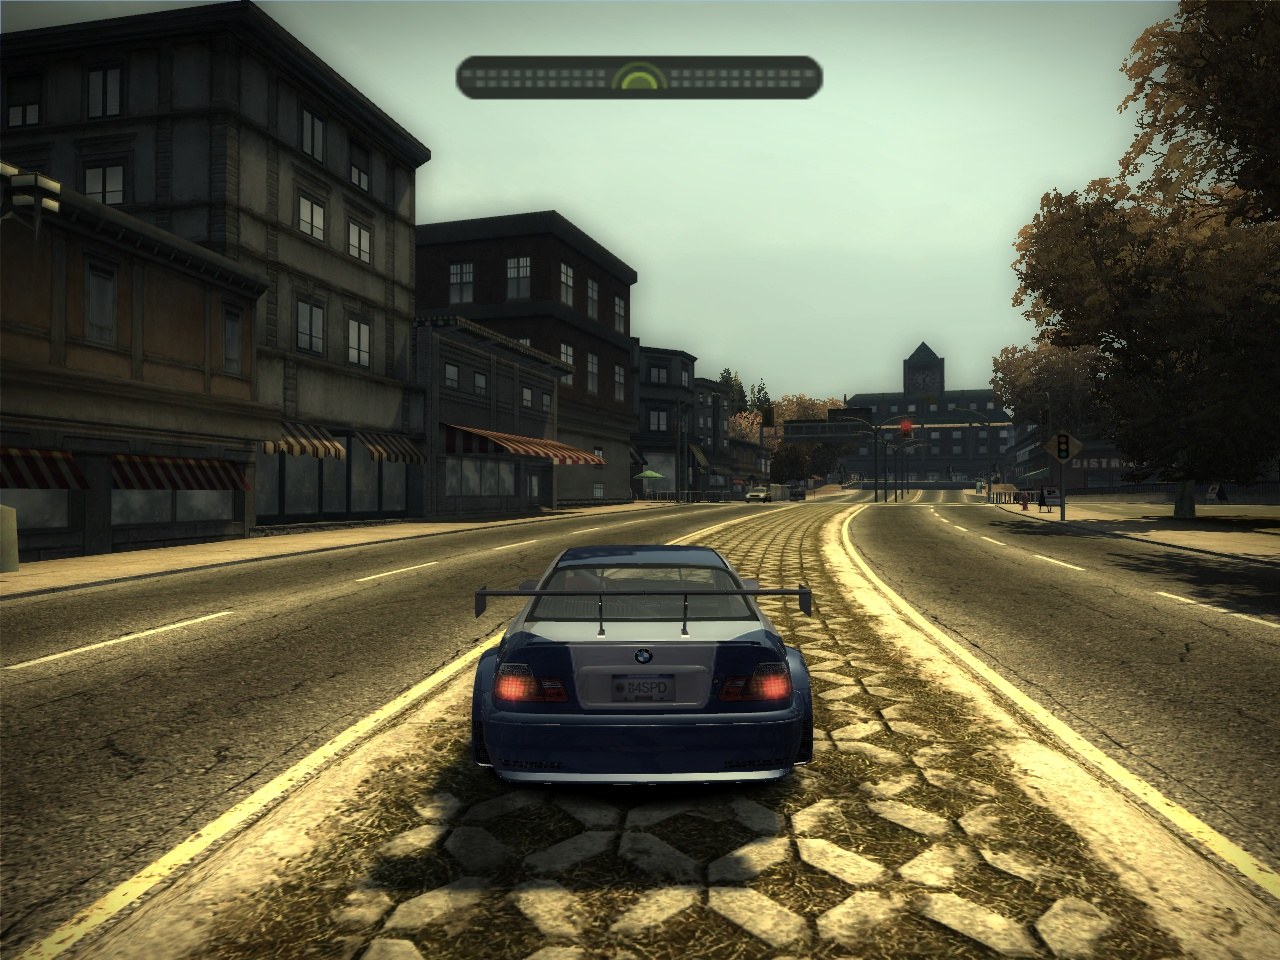 Nfs игра гонки. Need for Speed most wanted 2005. Нфс most wanted. NFS most wanted 2005 мост. Гонки NFS most wanted 2005.